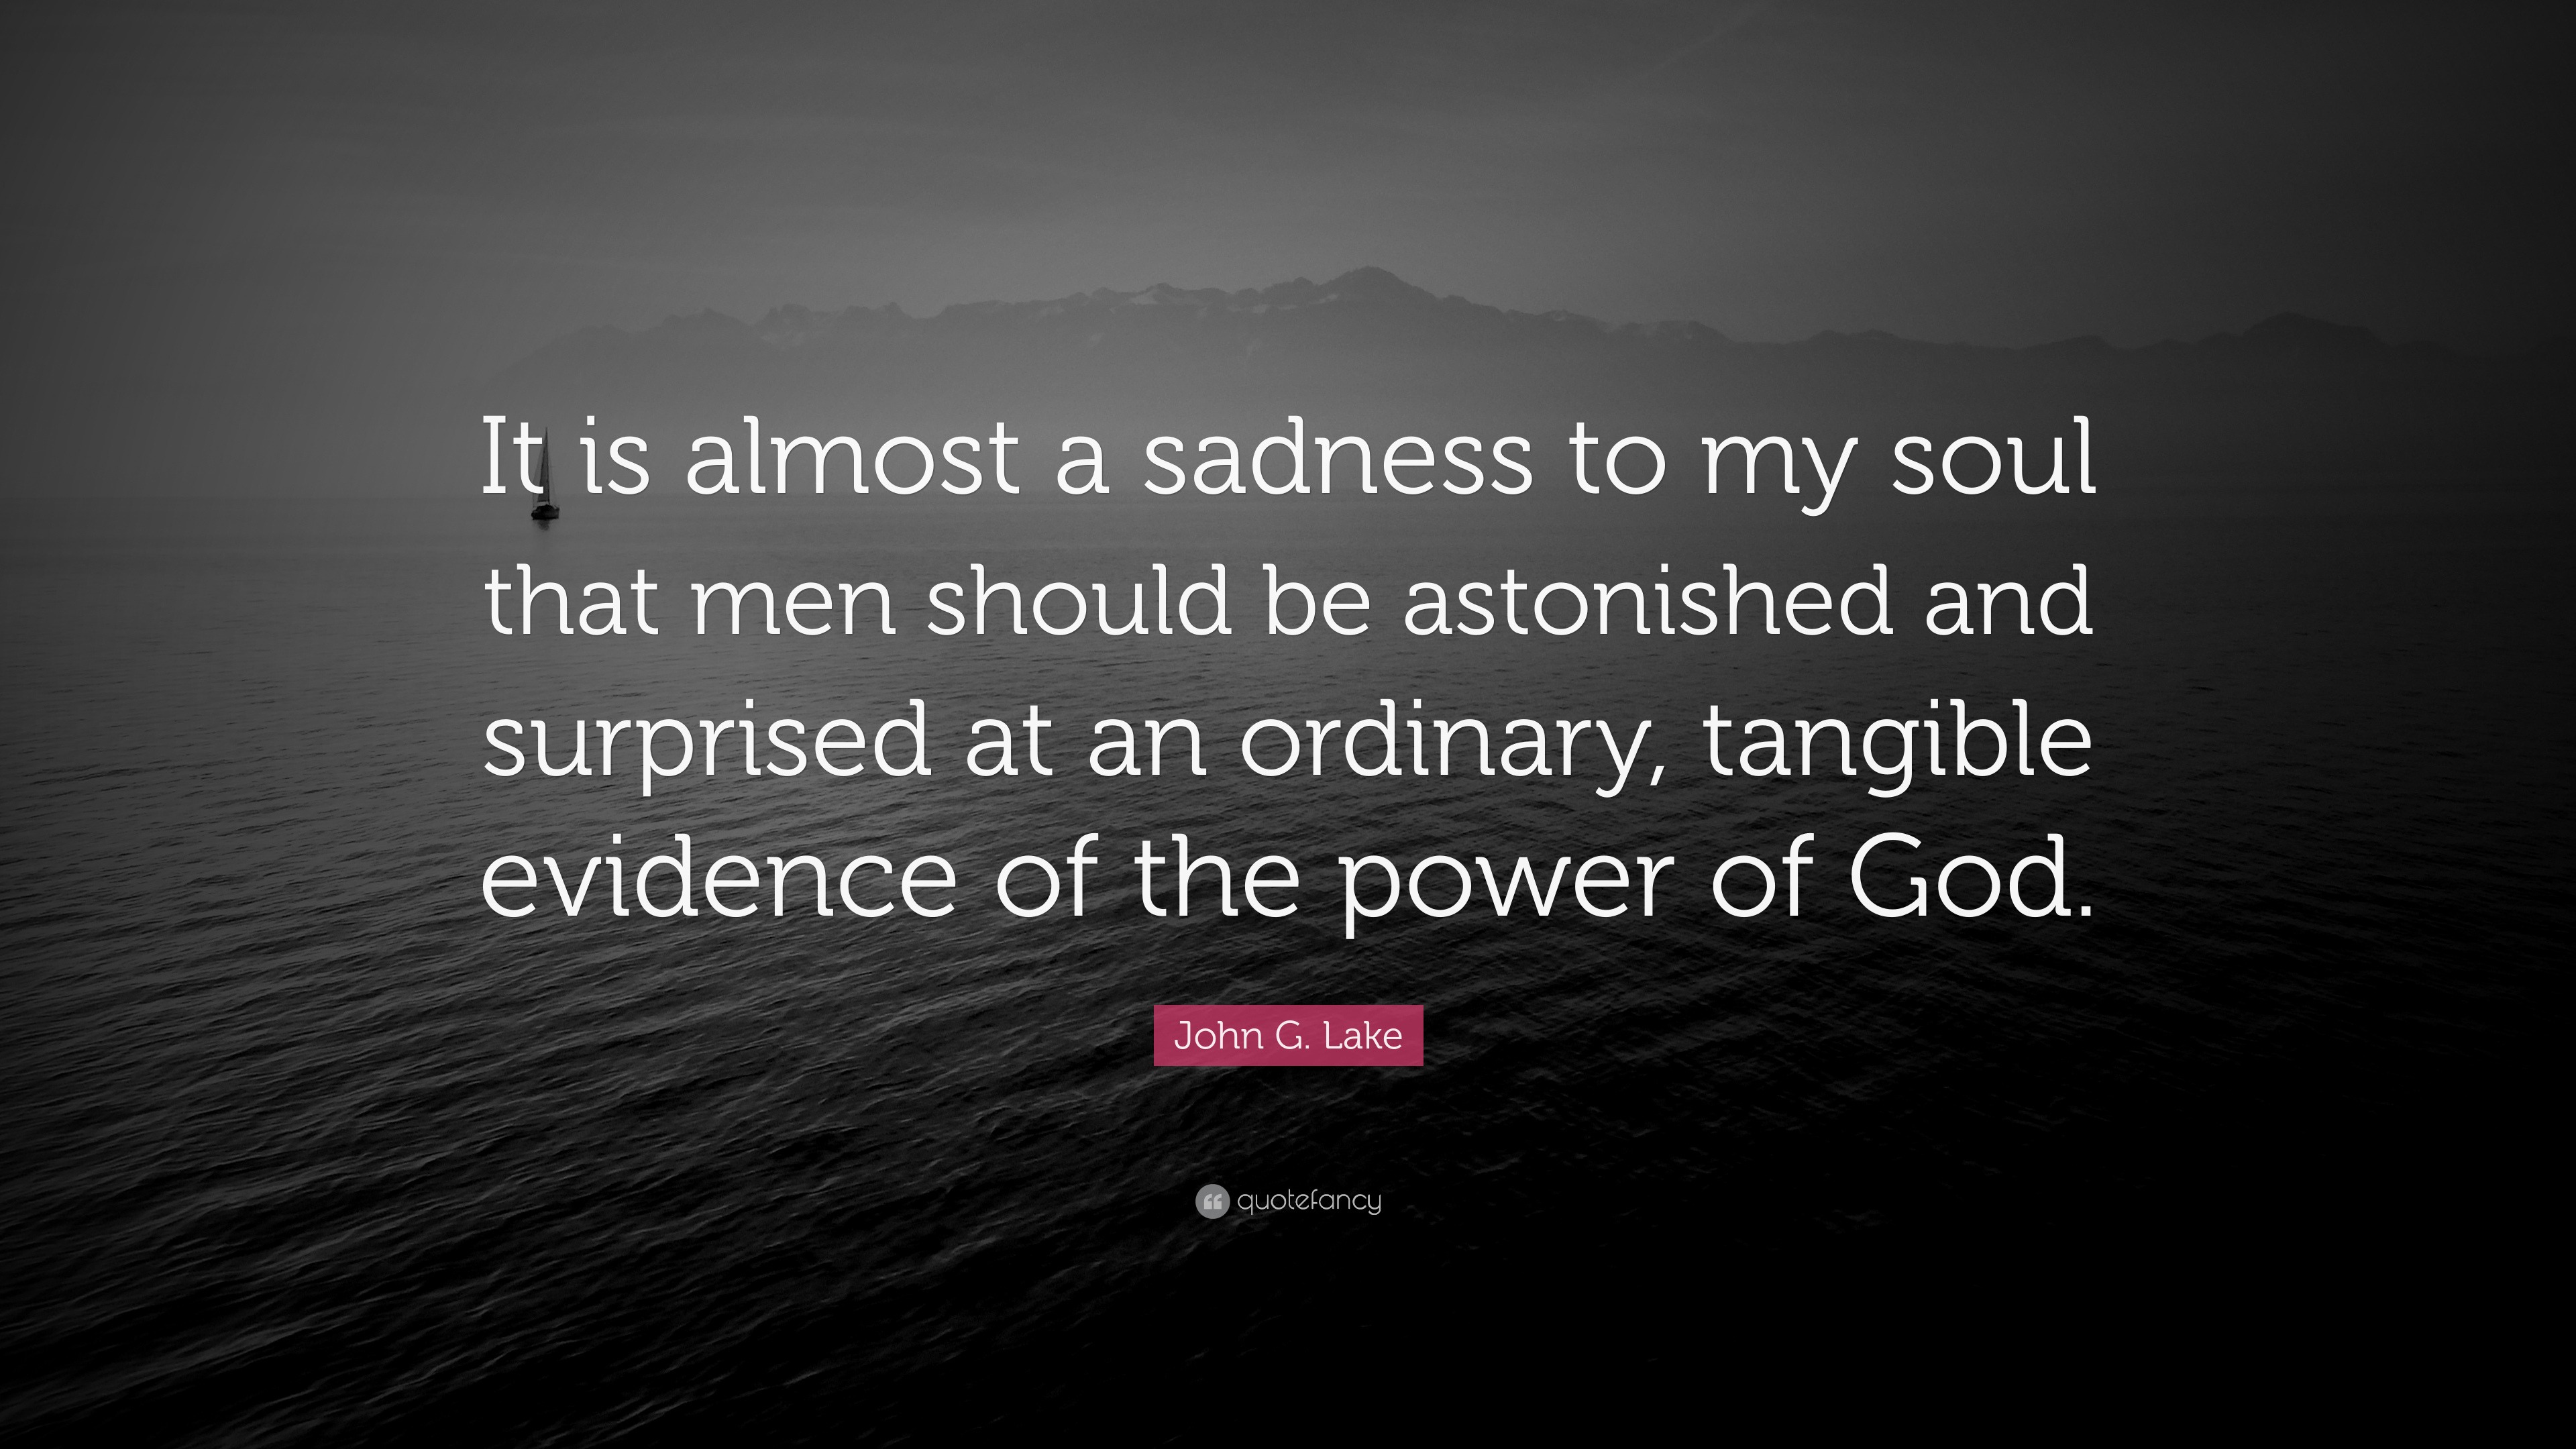 John G. Lake Quote: “It is almost a sadness to my soul that men should ...